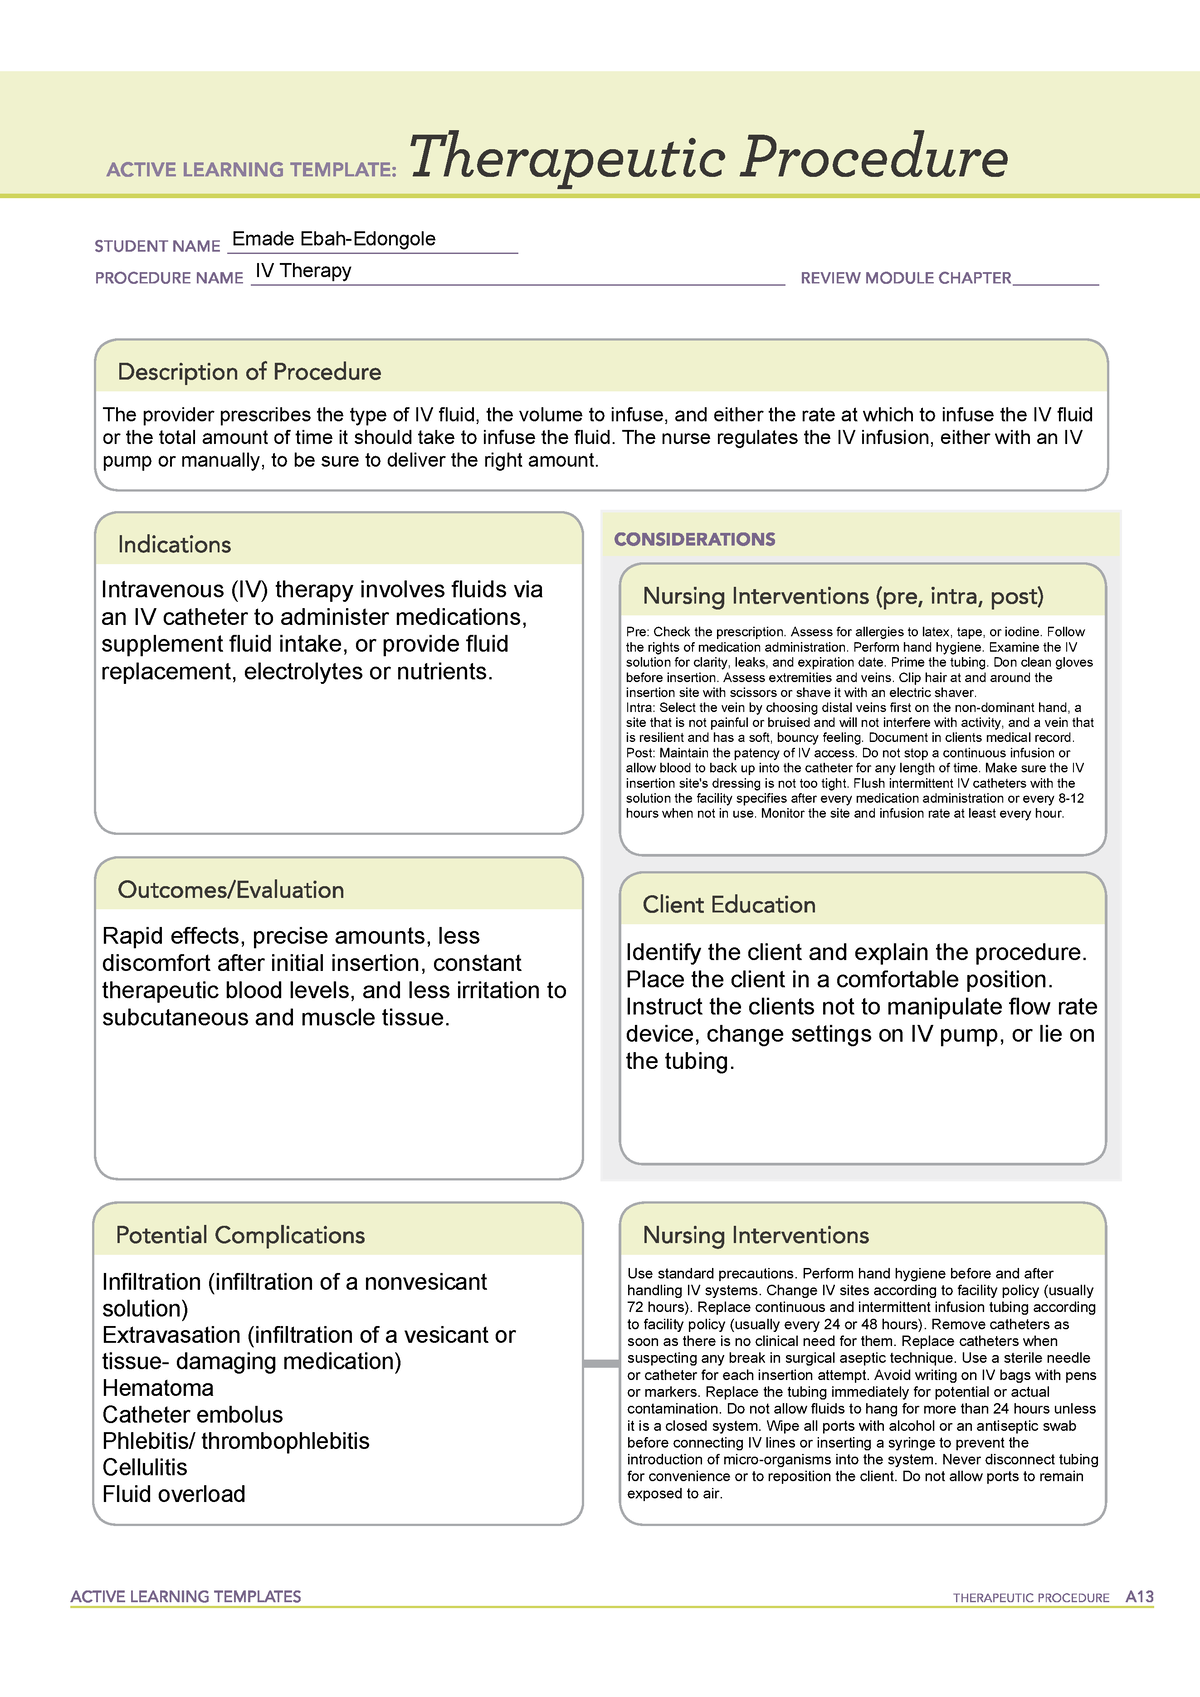 IV therapy Active learning template Emade EbahEdongole IV Therapy